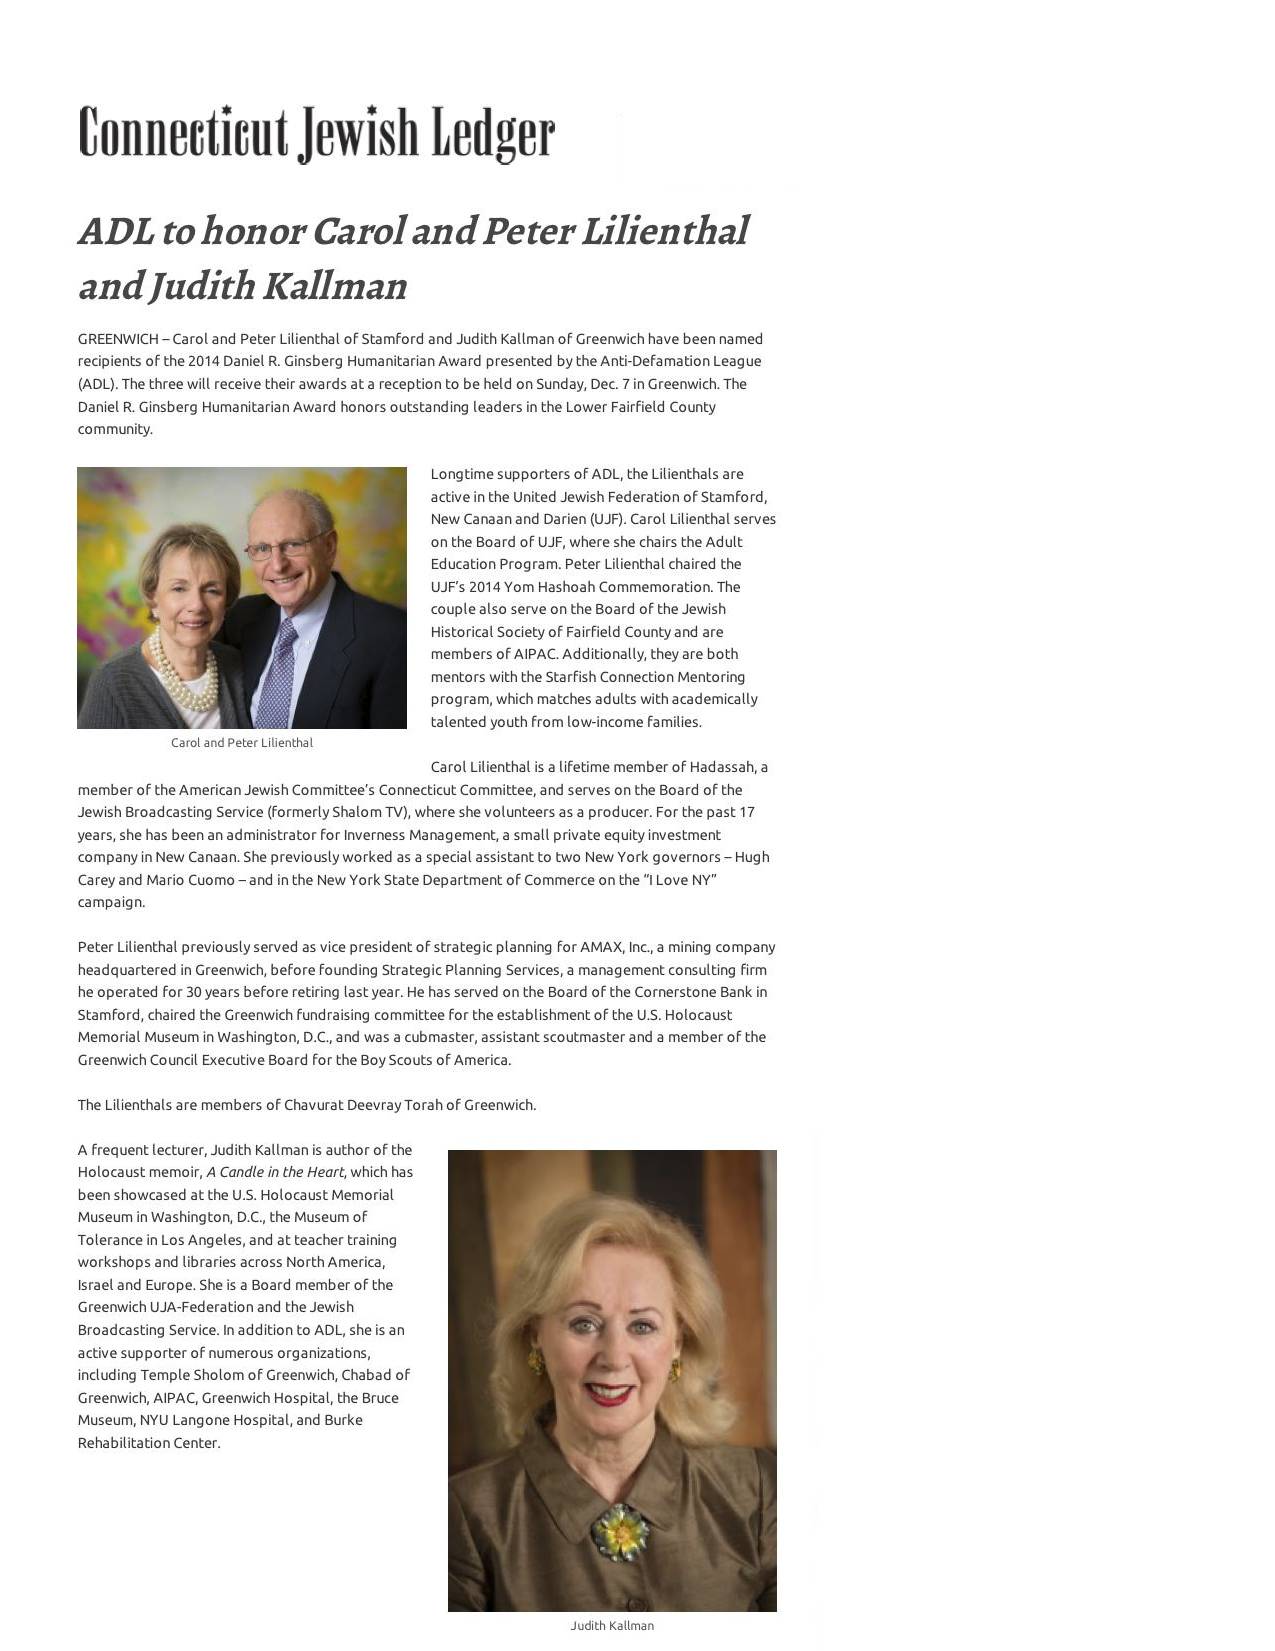 ADL to honor Carol and Peter Lilienthal and Judith Kallman - Jewish Ledger